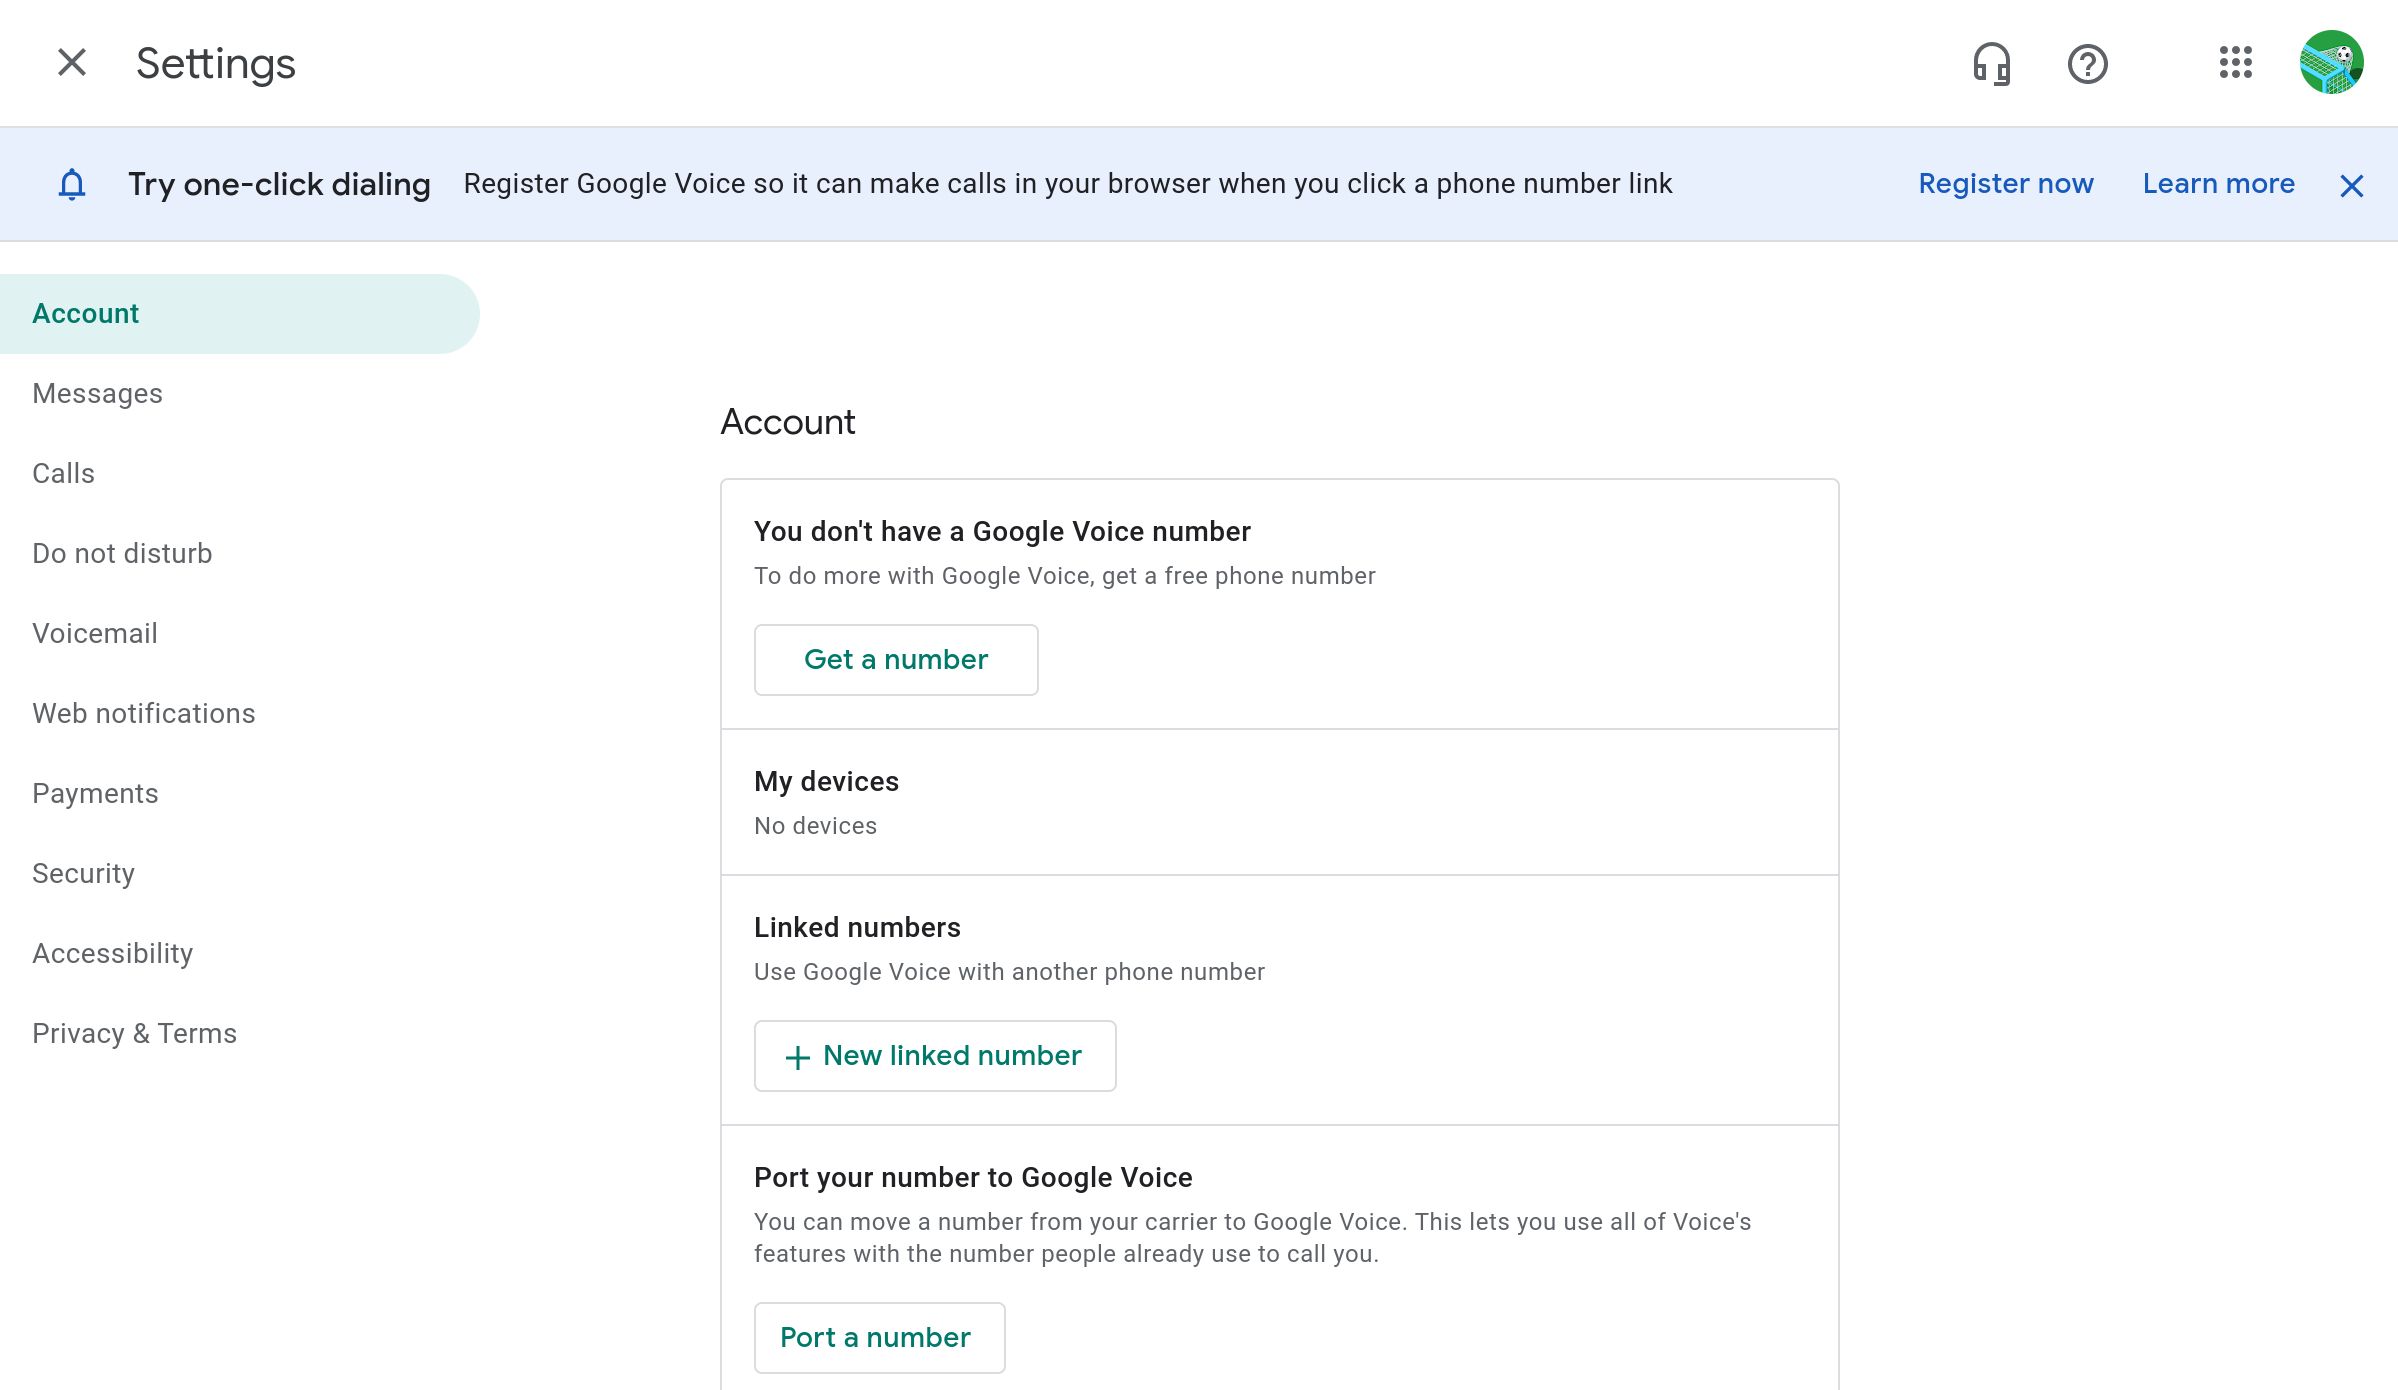 The Settings section of the Google Voice website without a registered number